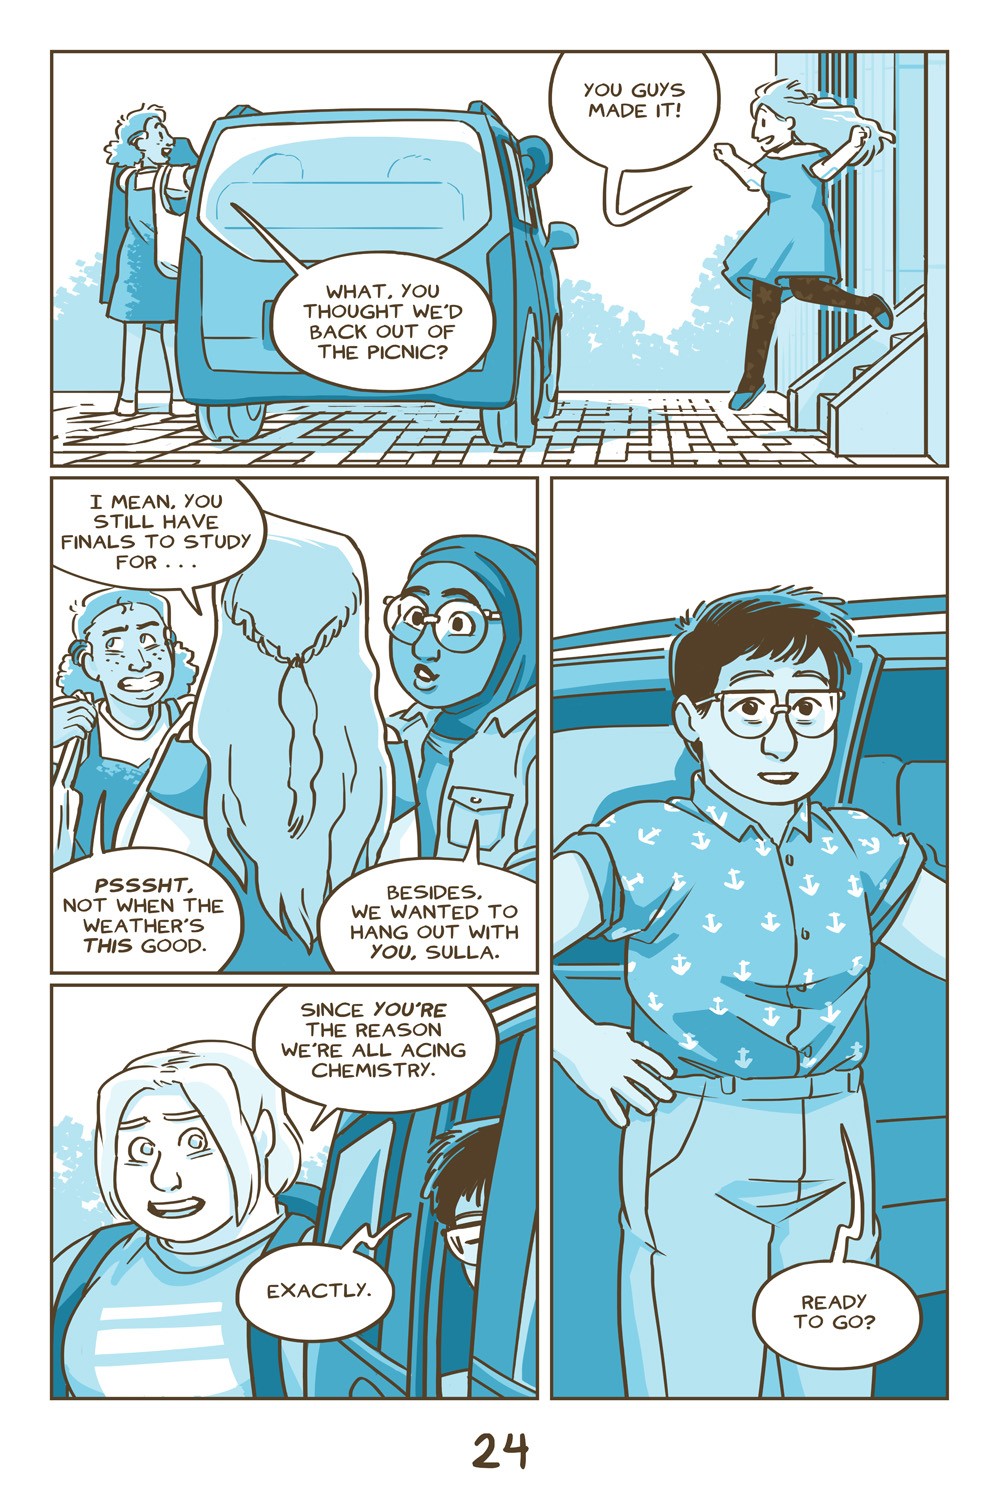 Chapter 8, Page 24